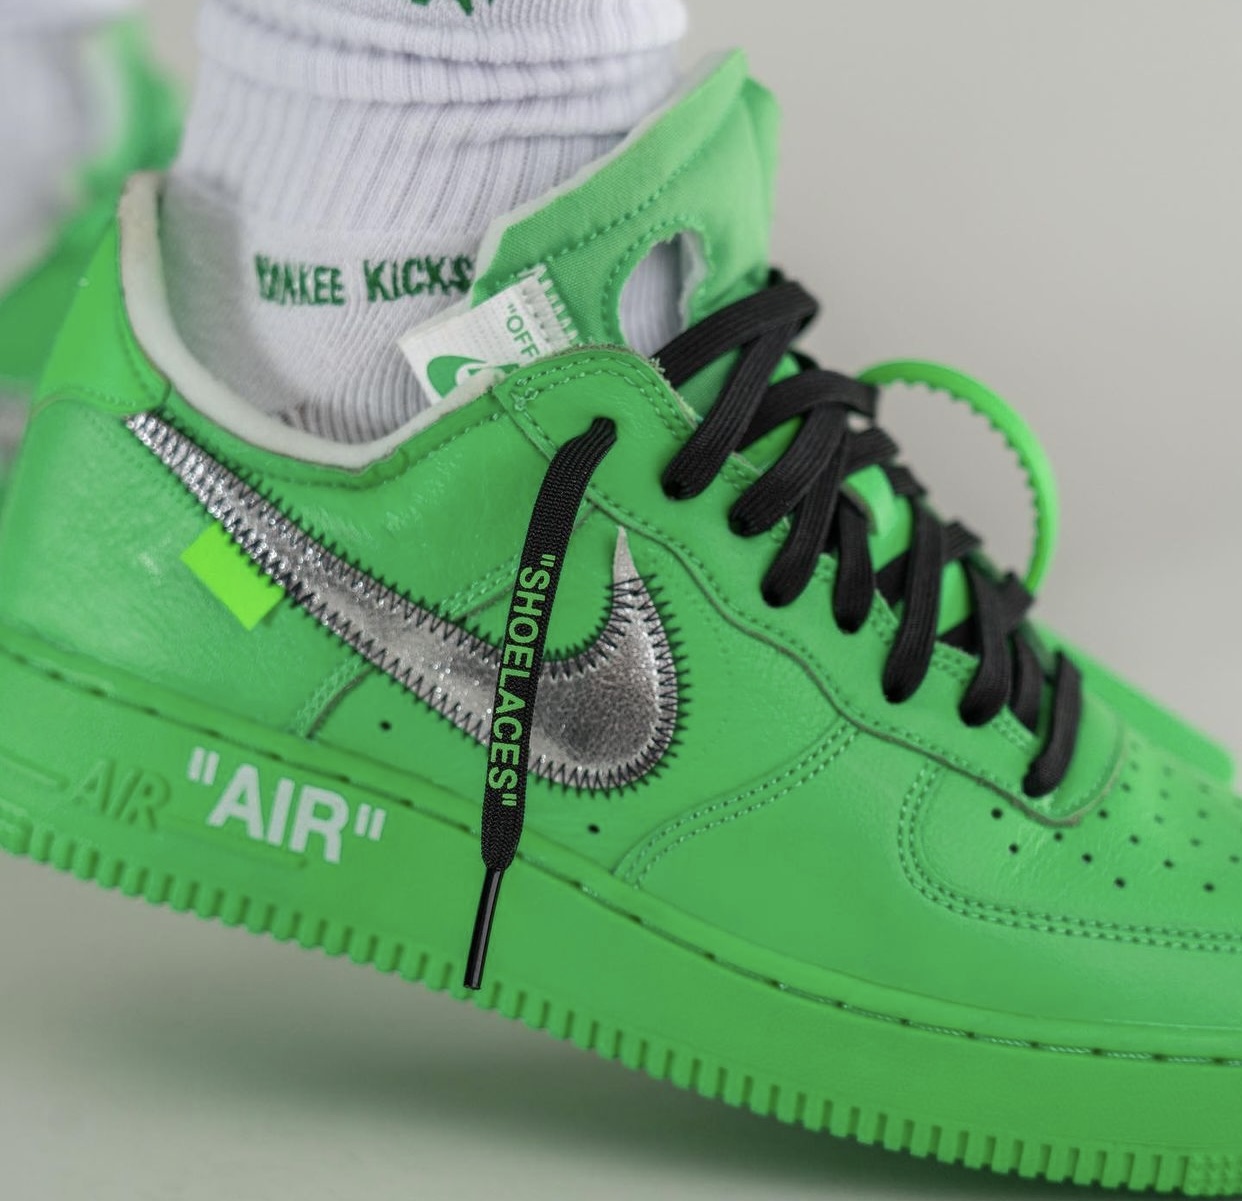 Off-White Nike Air Force 1 Low Light Green Spark DX1419-300 On-Feet